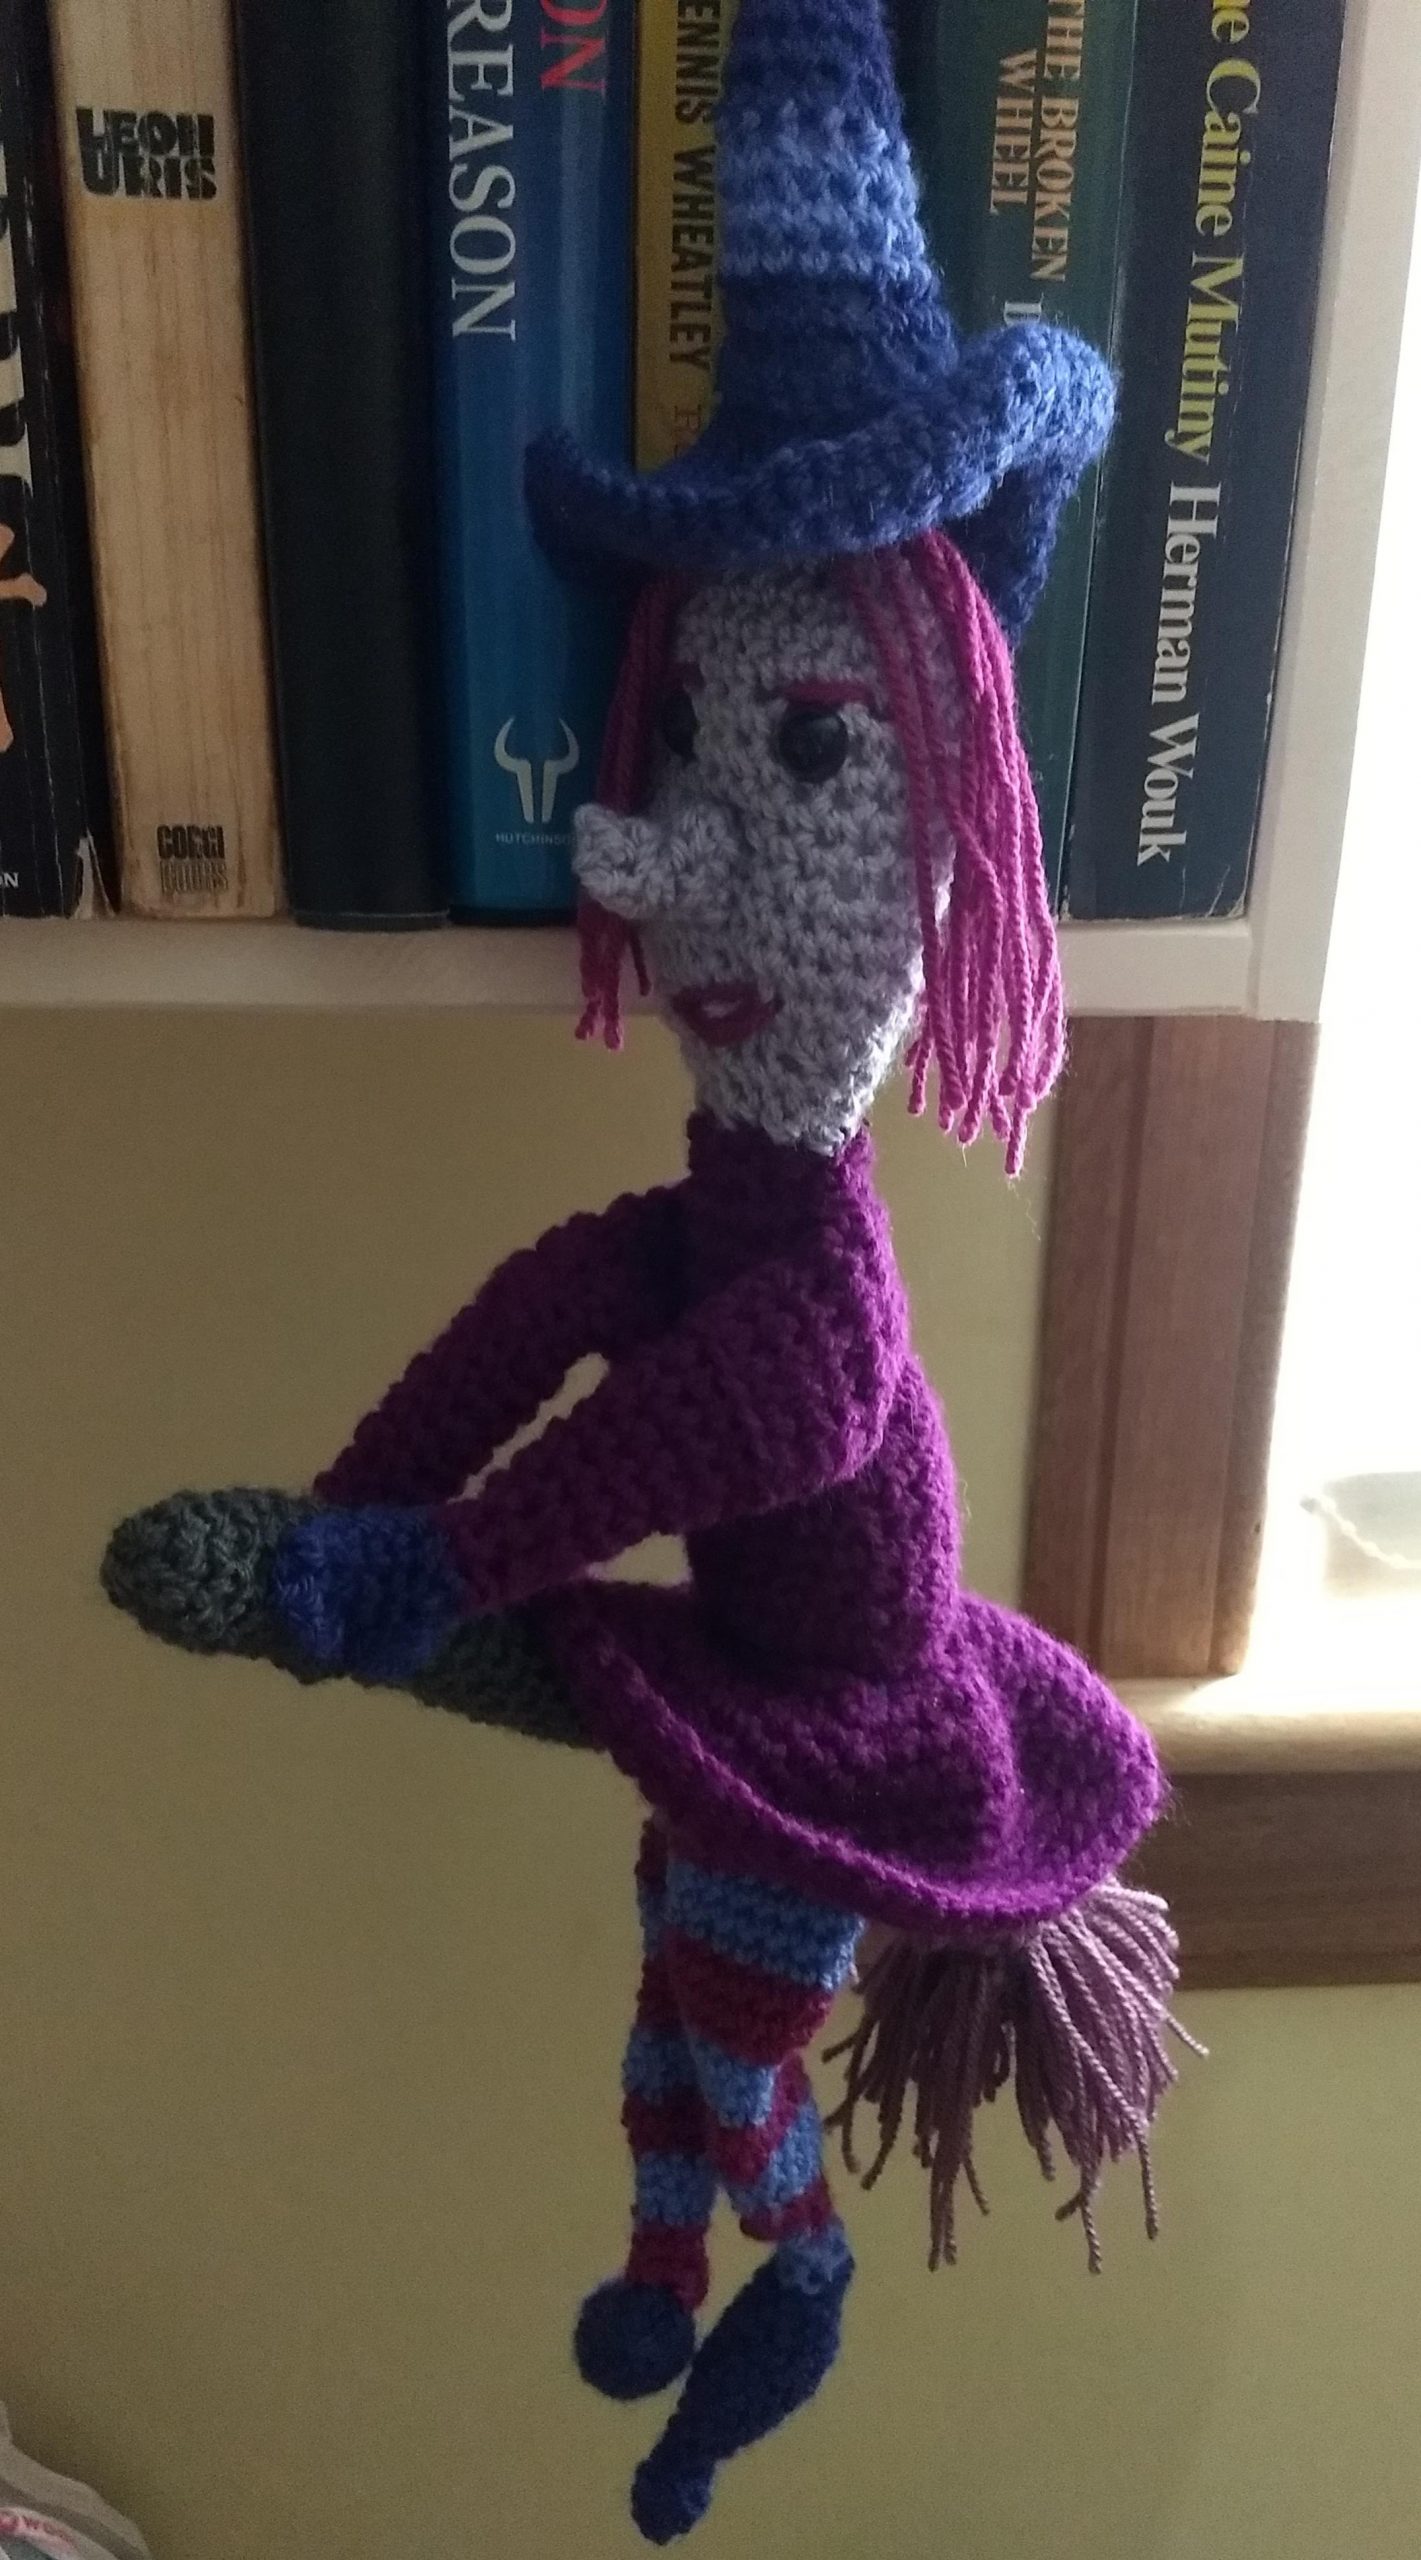 A crochet witch in a deep purple dress and stripey purple witch hat, flying on her brookstick, which is grey with purple-pink bristles, her skin is purple grey and she has a long nose. She is wearing purple striped leggings and long purple shoes.